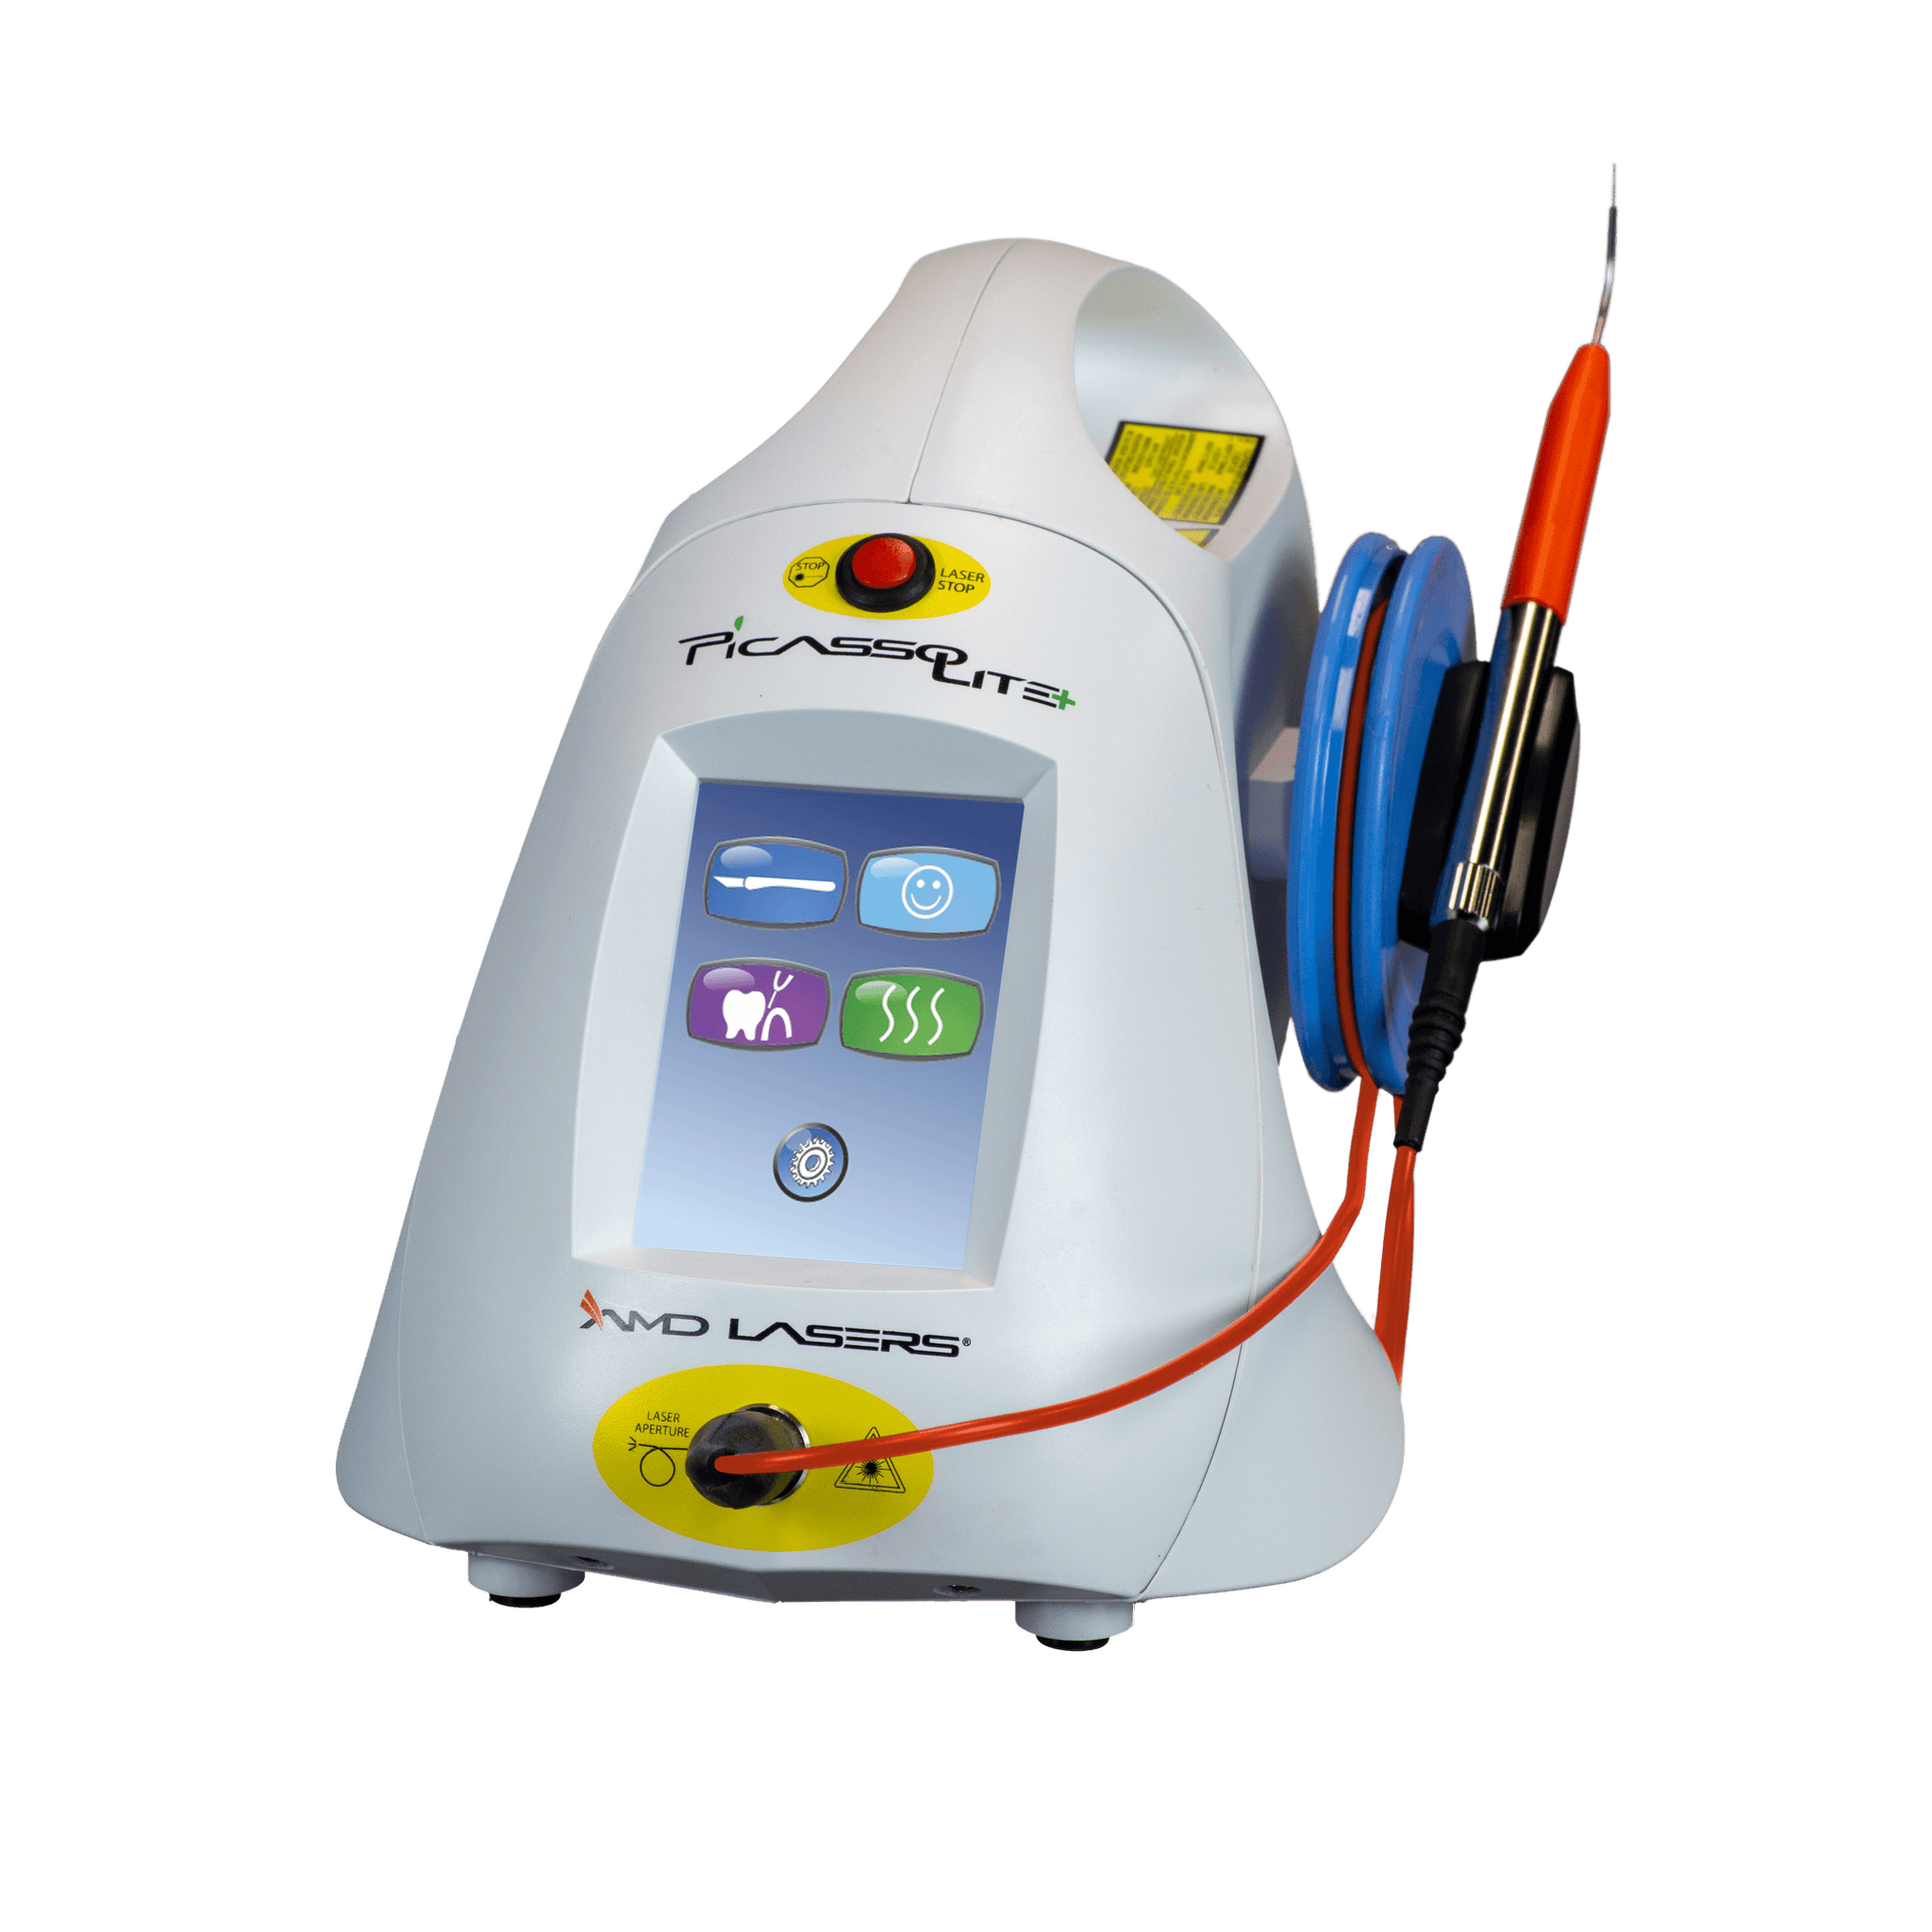 Soft Tissue Diode Lasers